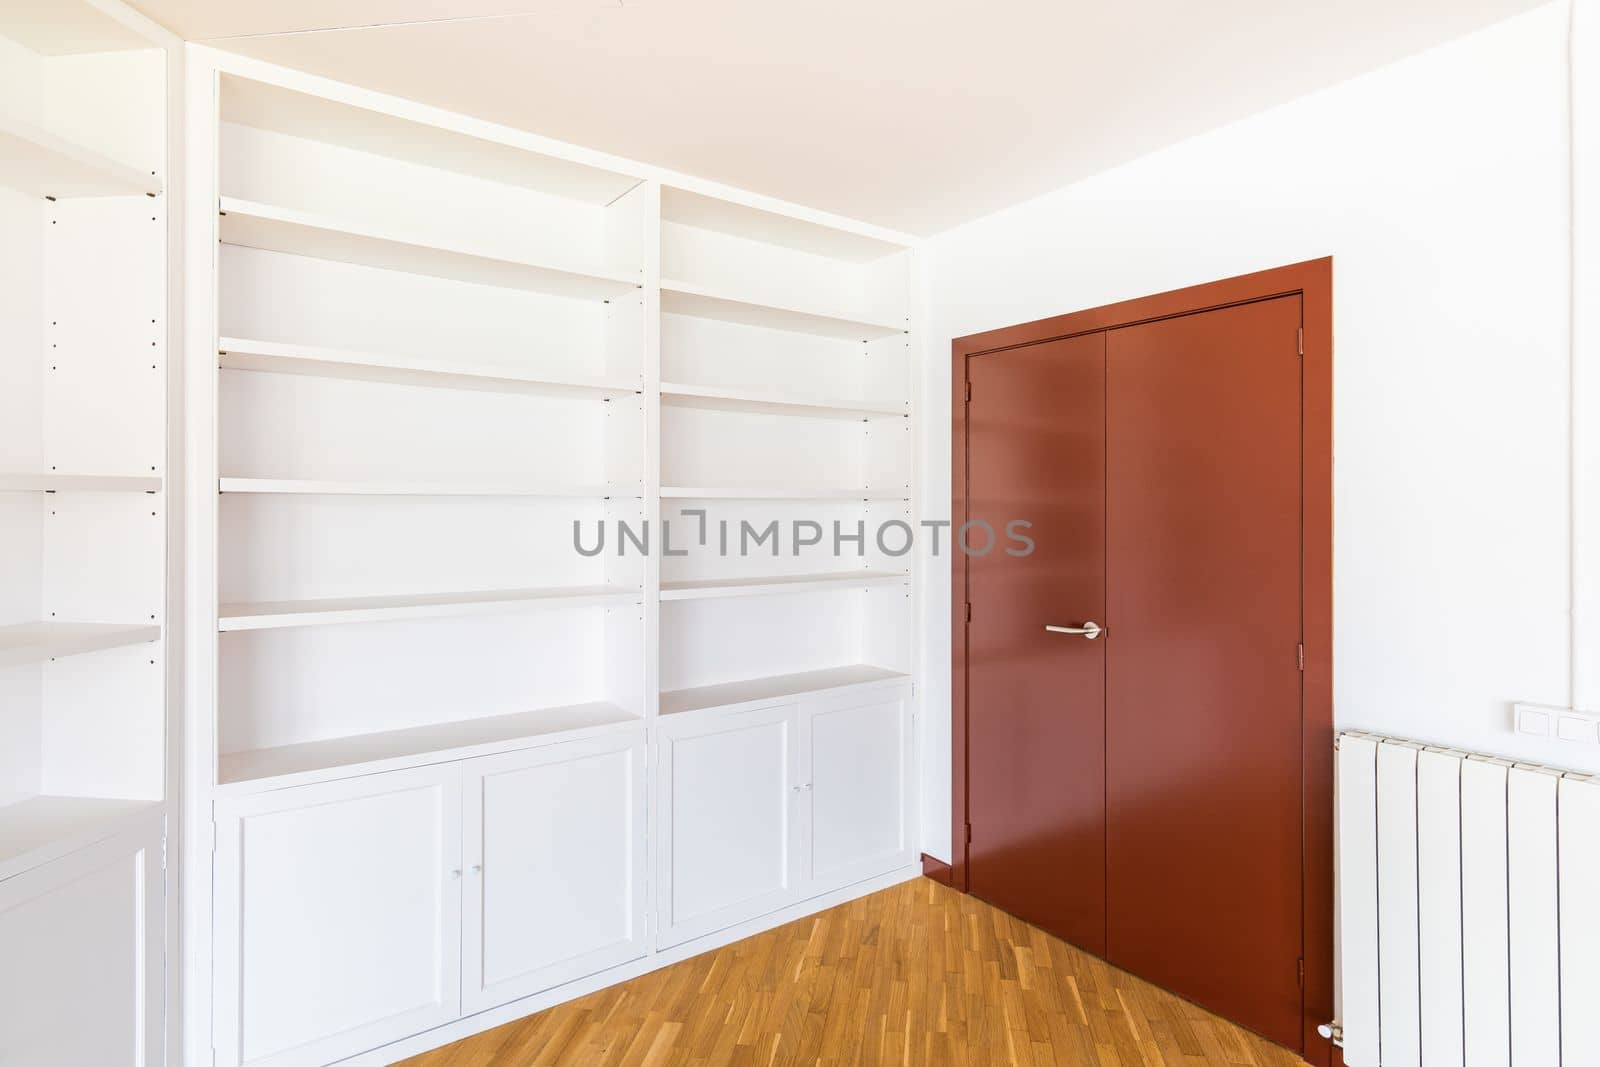 Large wooden closed mahogany door with a brass handle for opening. Along the wall is a white open cabinet with shelves for books and interior items for coziness and comfort. The floor is parquet. by apavlin